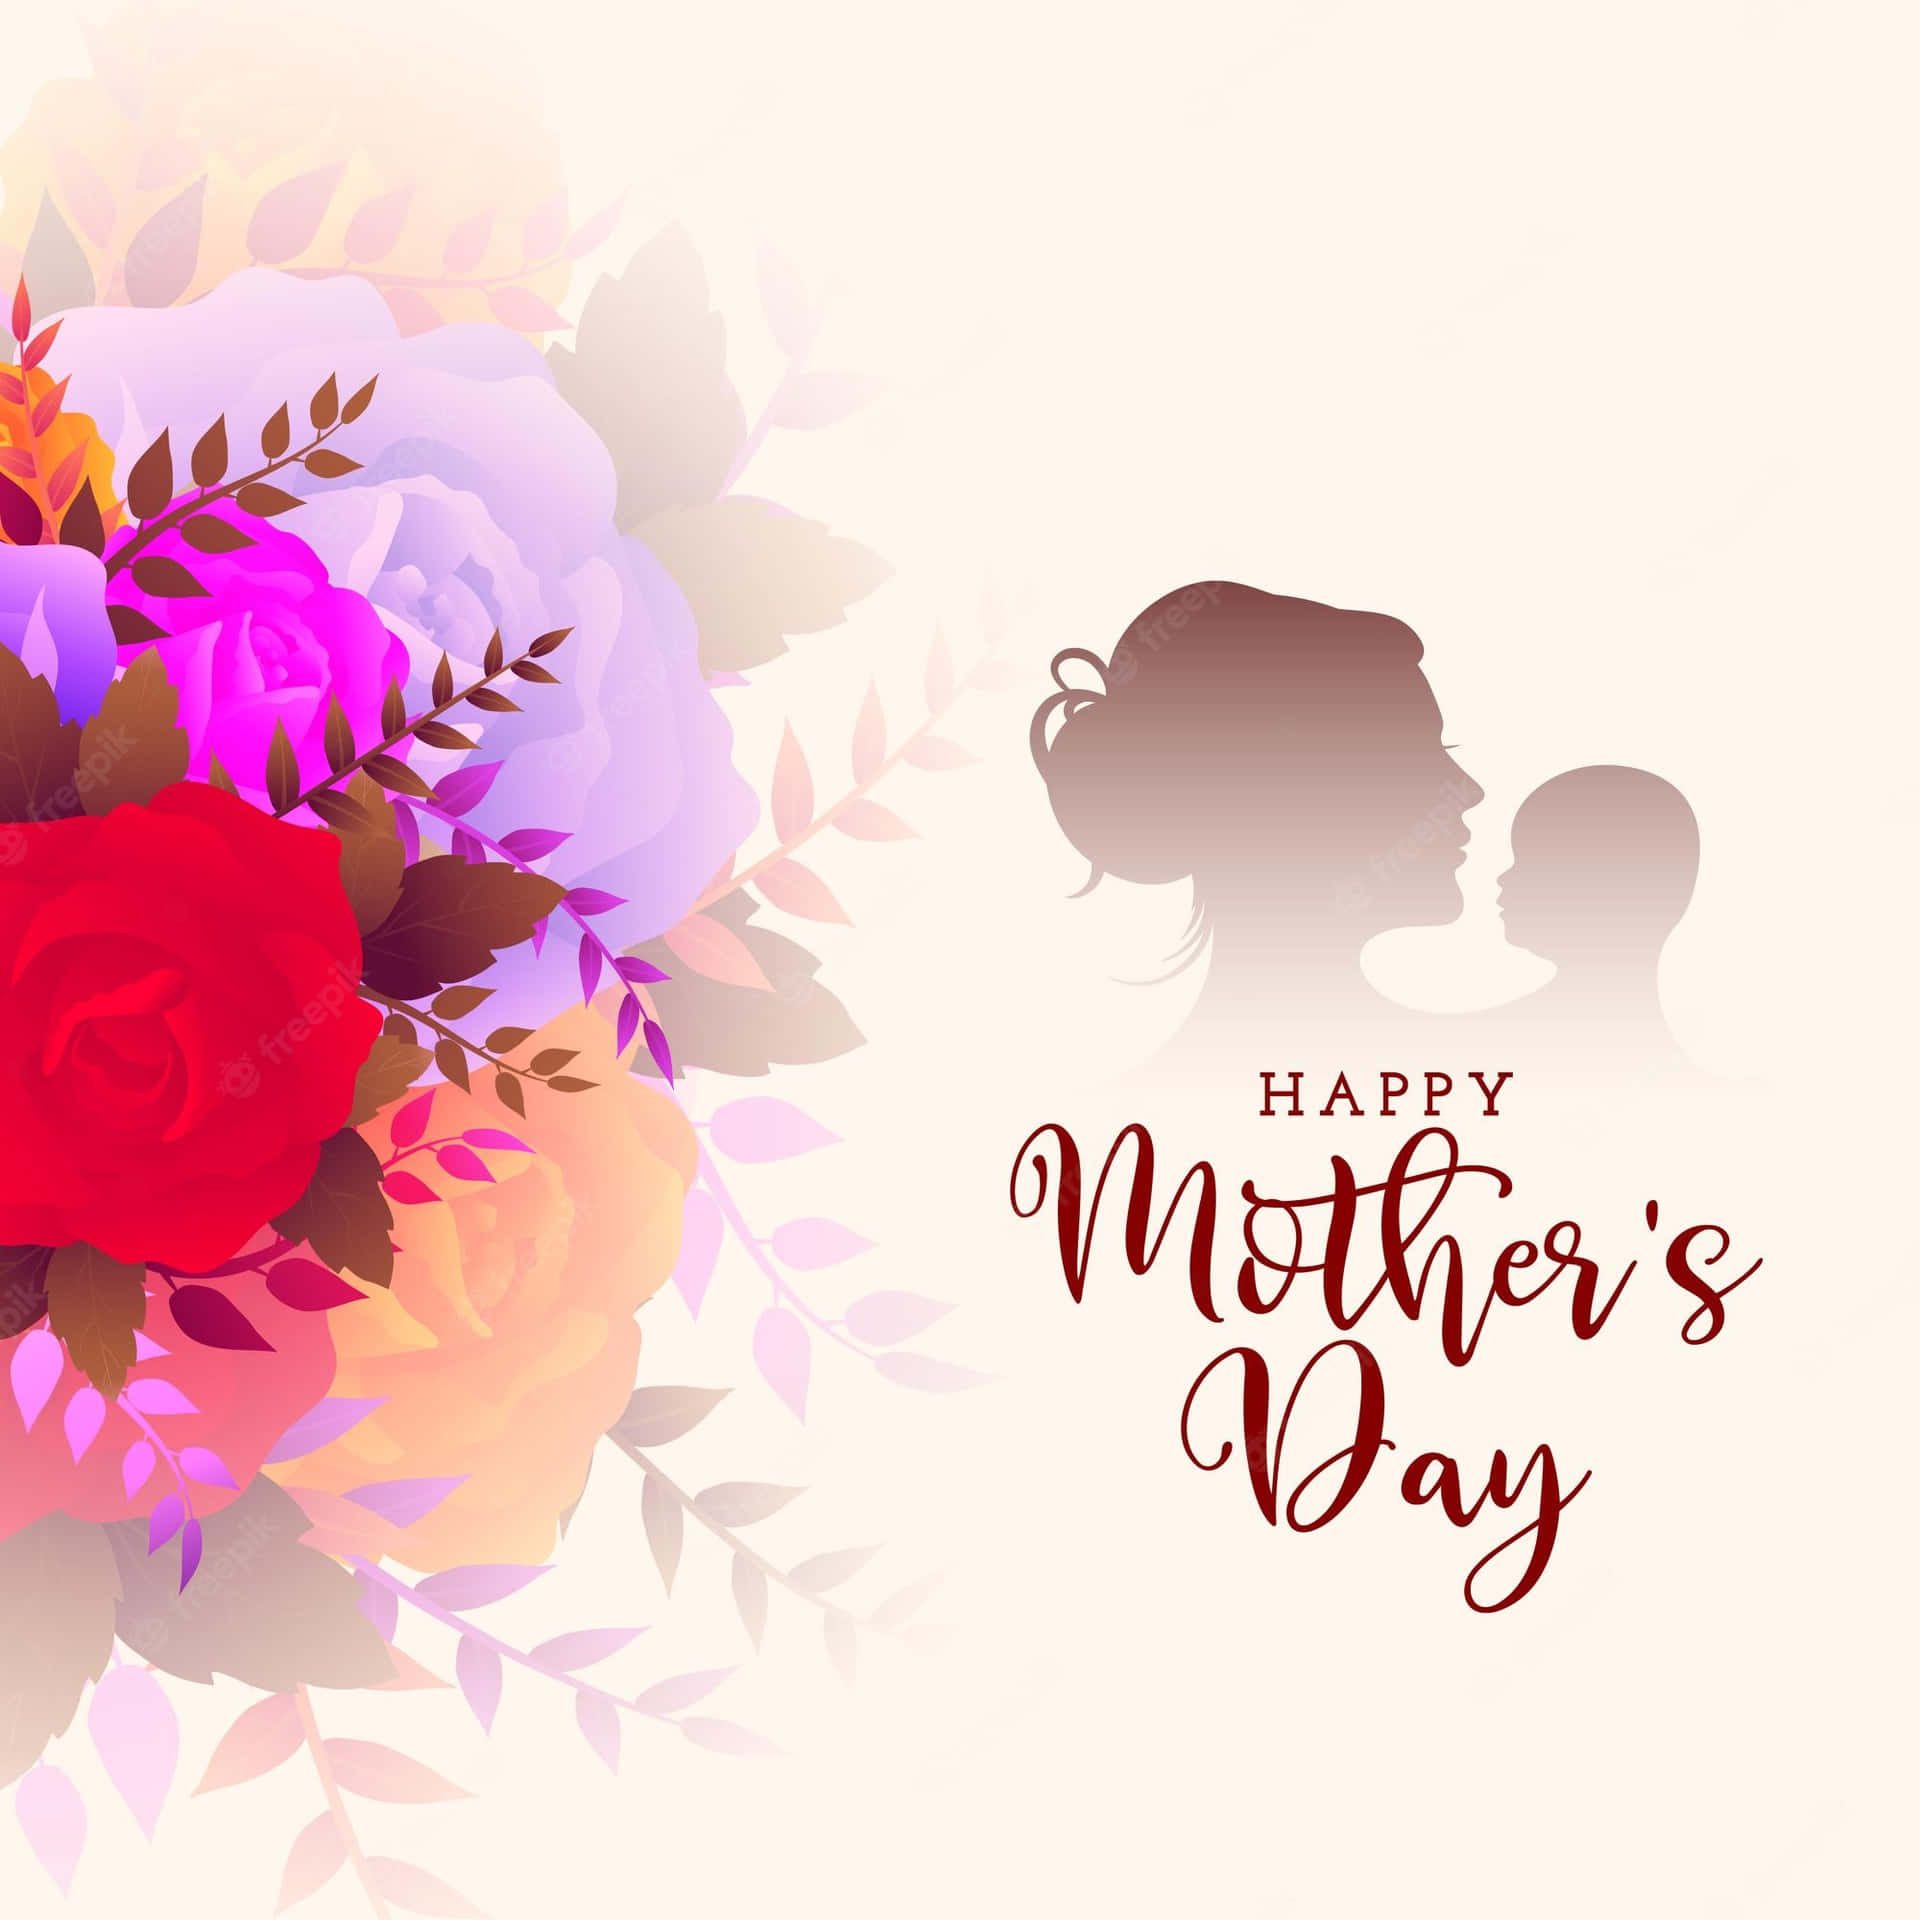 Happy Mother's Day Card With A Woman And Flowers